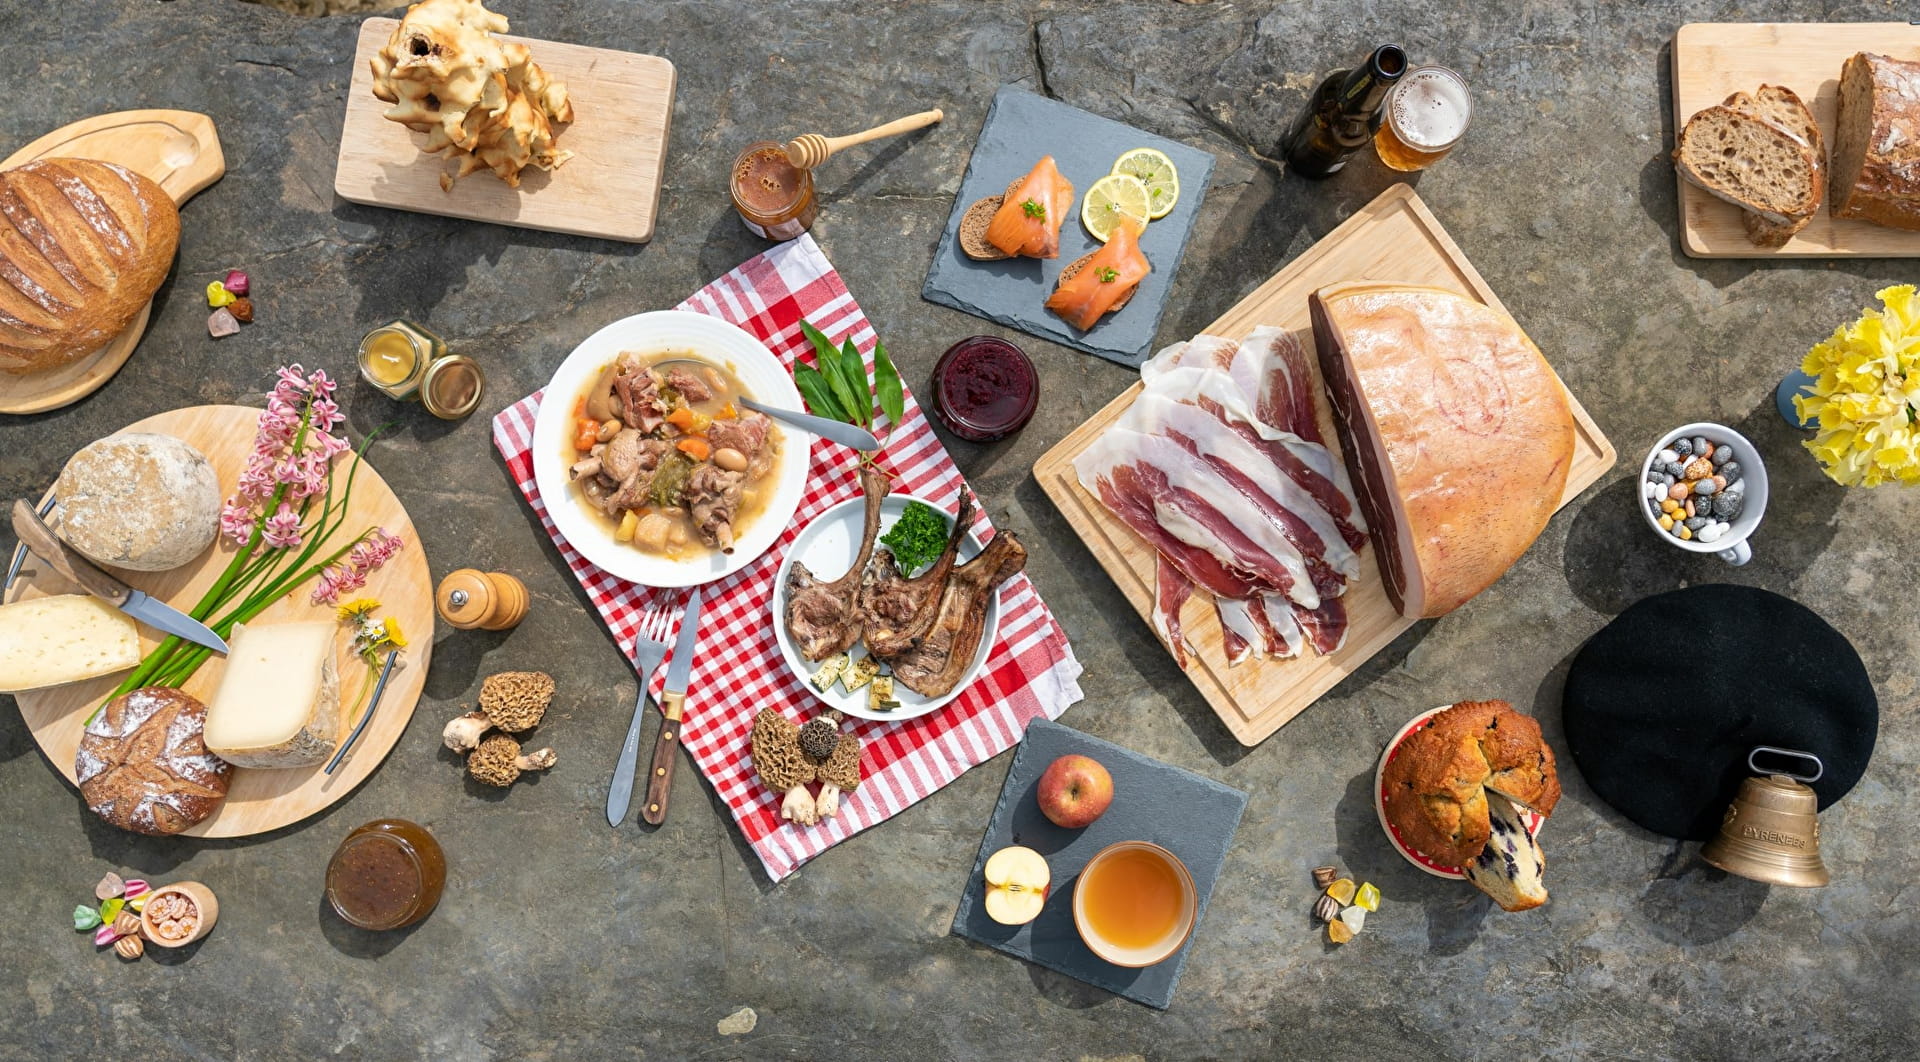 Regional products from the Pyrenees